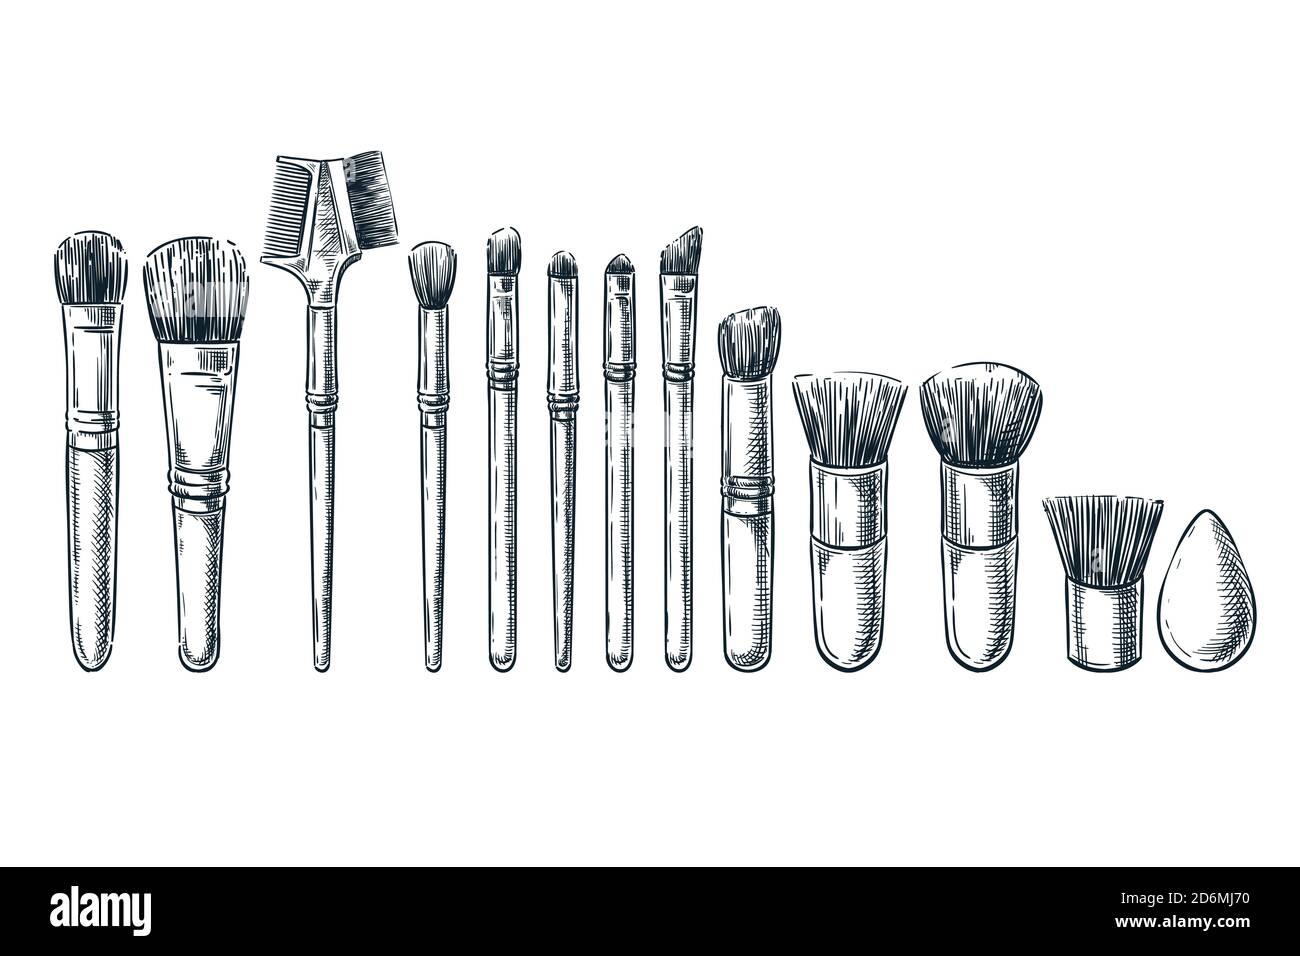 Makeup brushes vector sketch illustration. Female cosmetics design elements. Hand drawn isolated beauty tools. Stock Vector